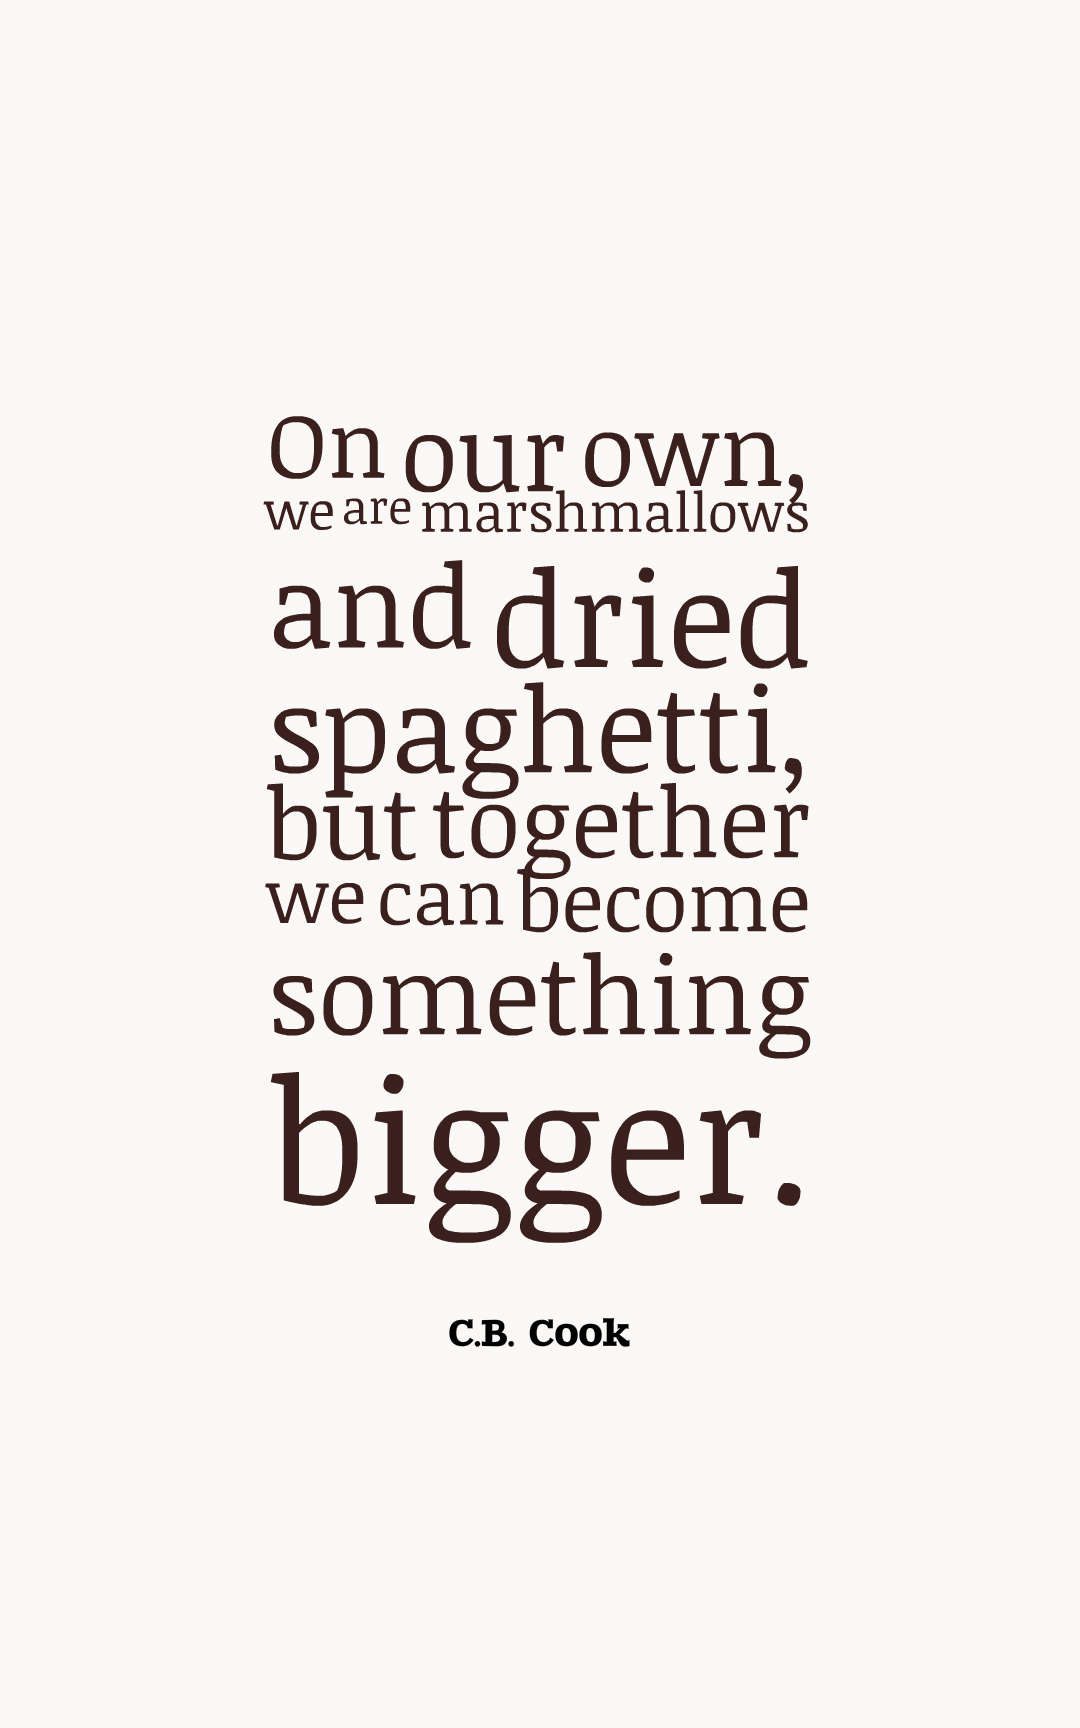 On our own, we are marshmallows and dried spaghetti, but together we can become something bigger.